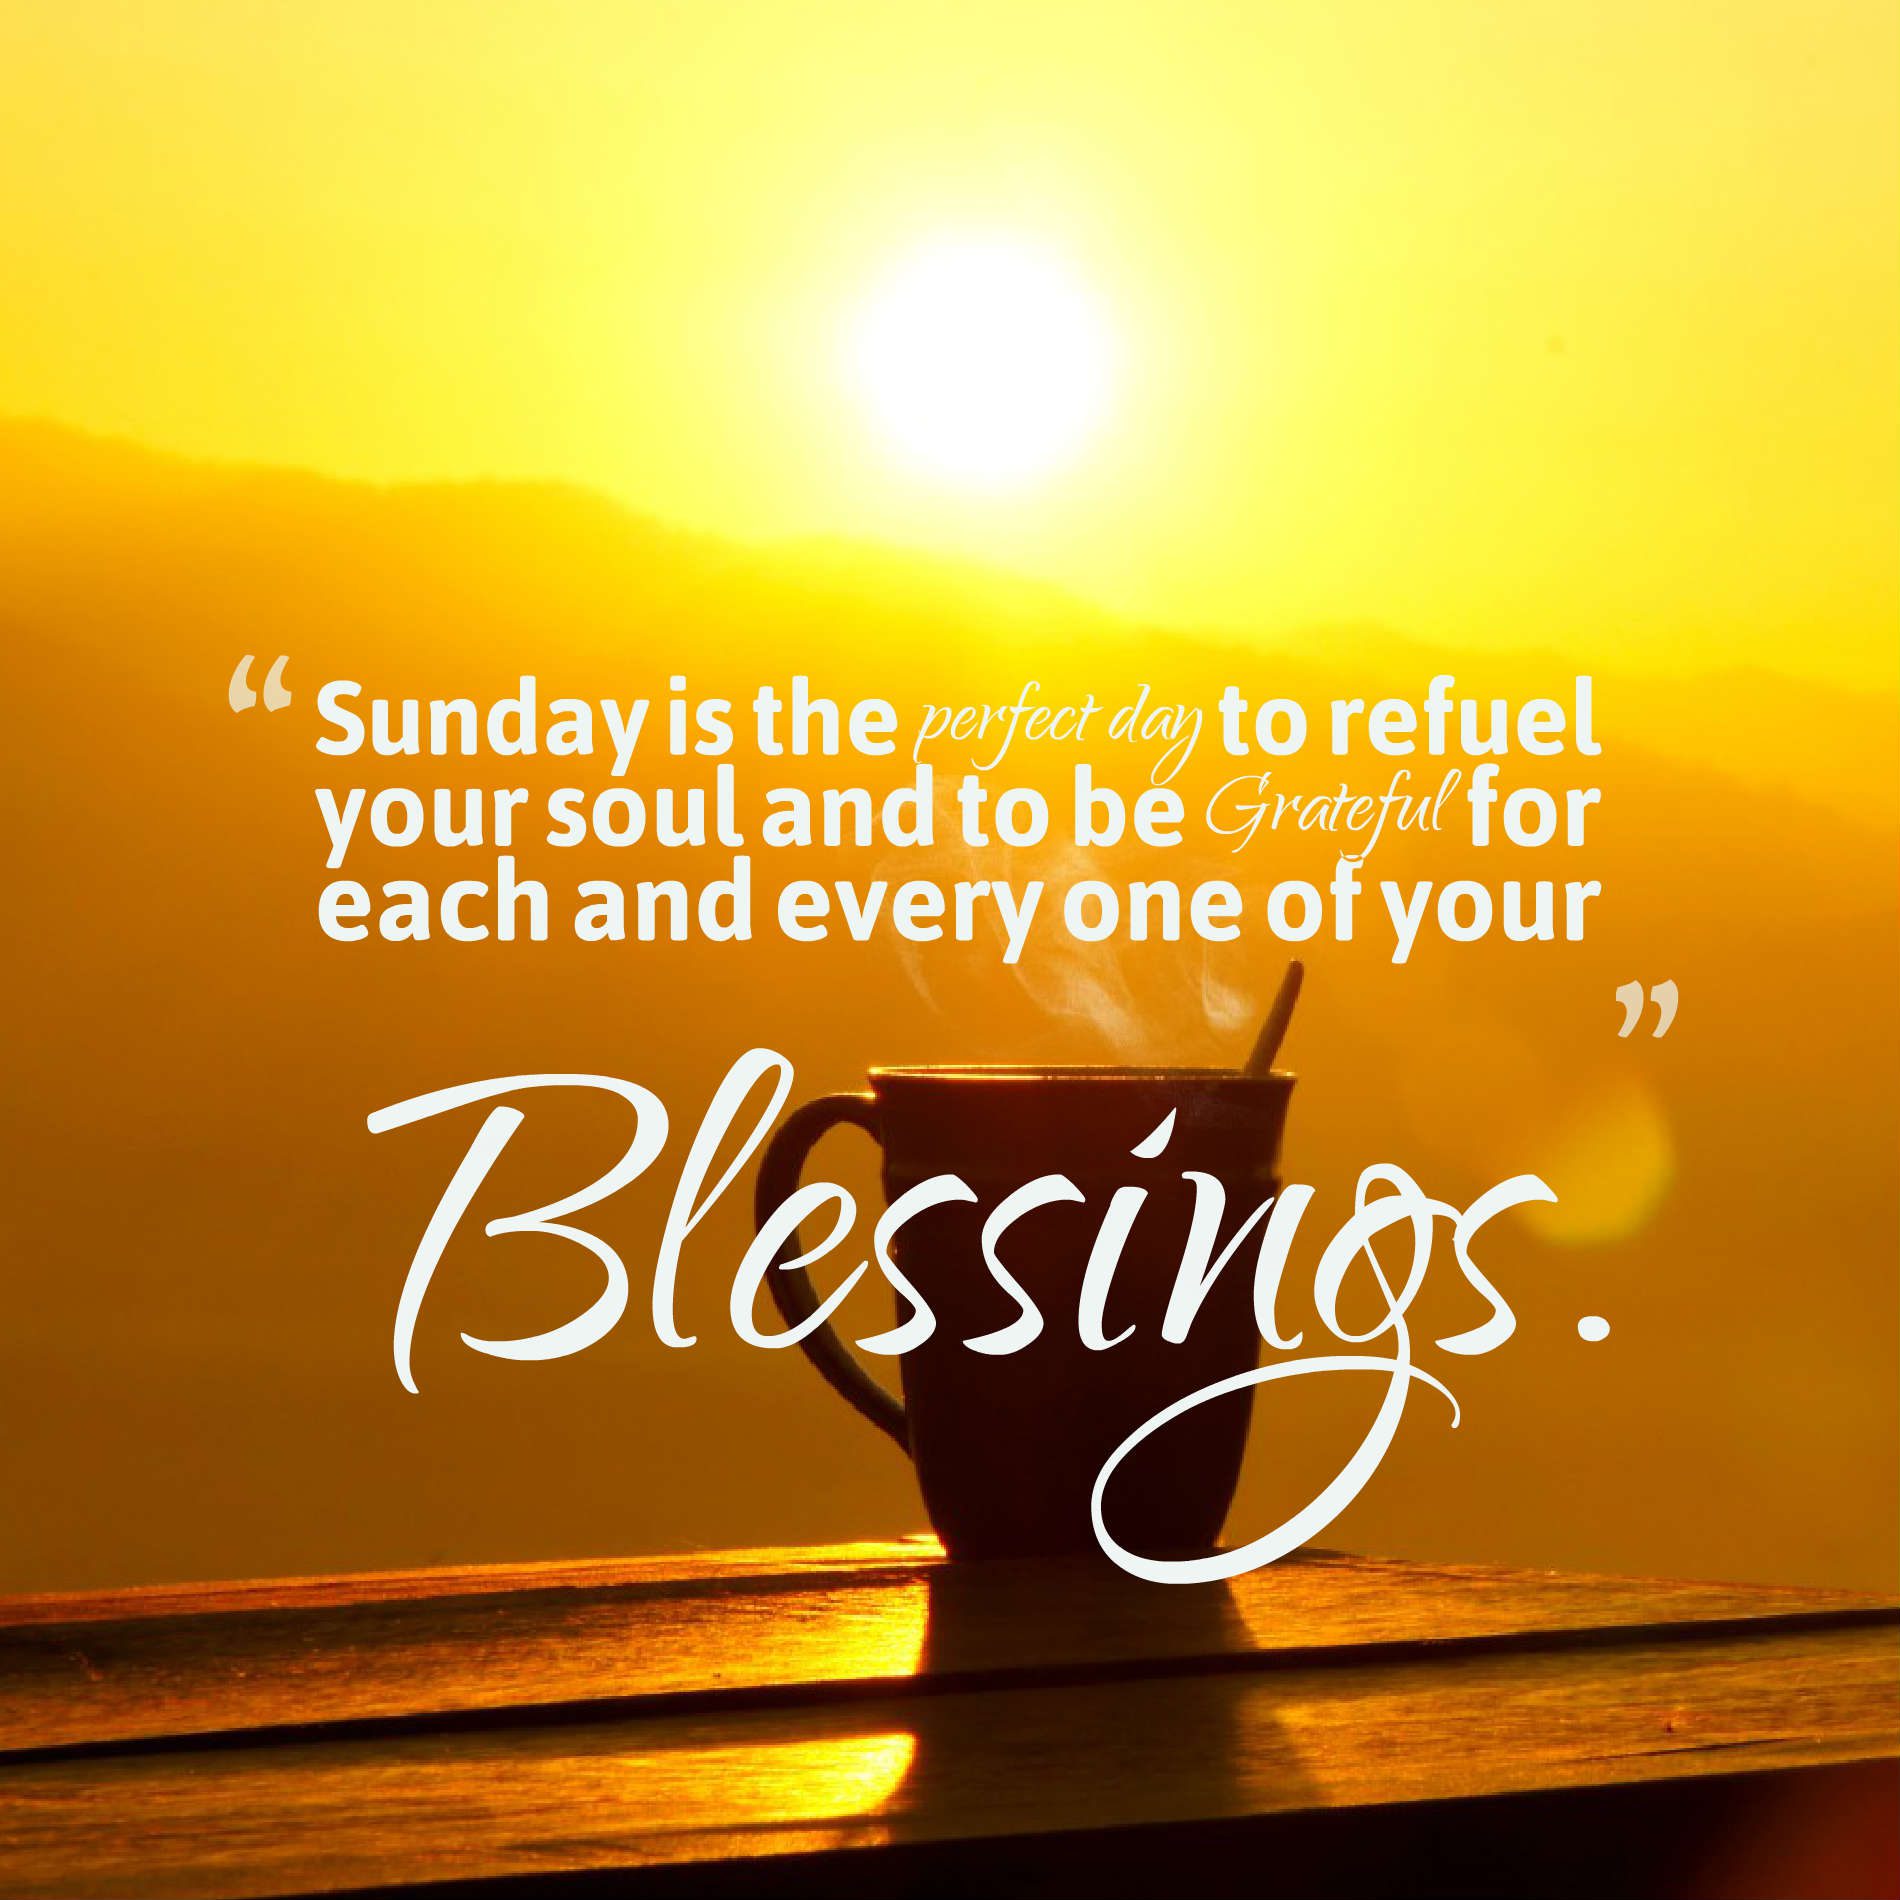 Sunday is the perfect day to refuel your soul and to be Grateful for each and every one of your Blessings.